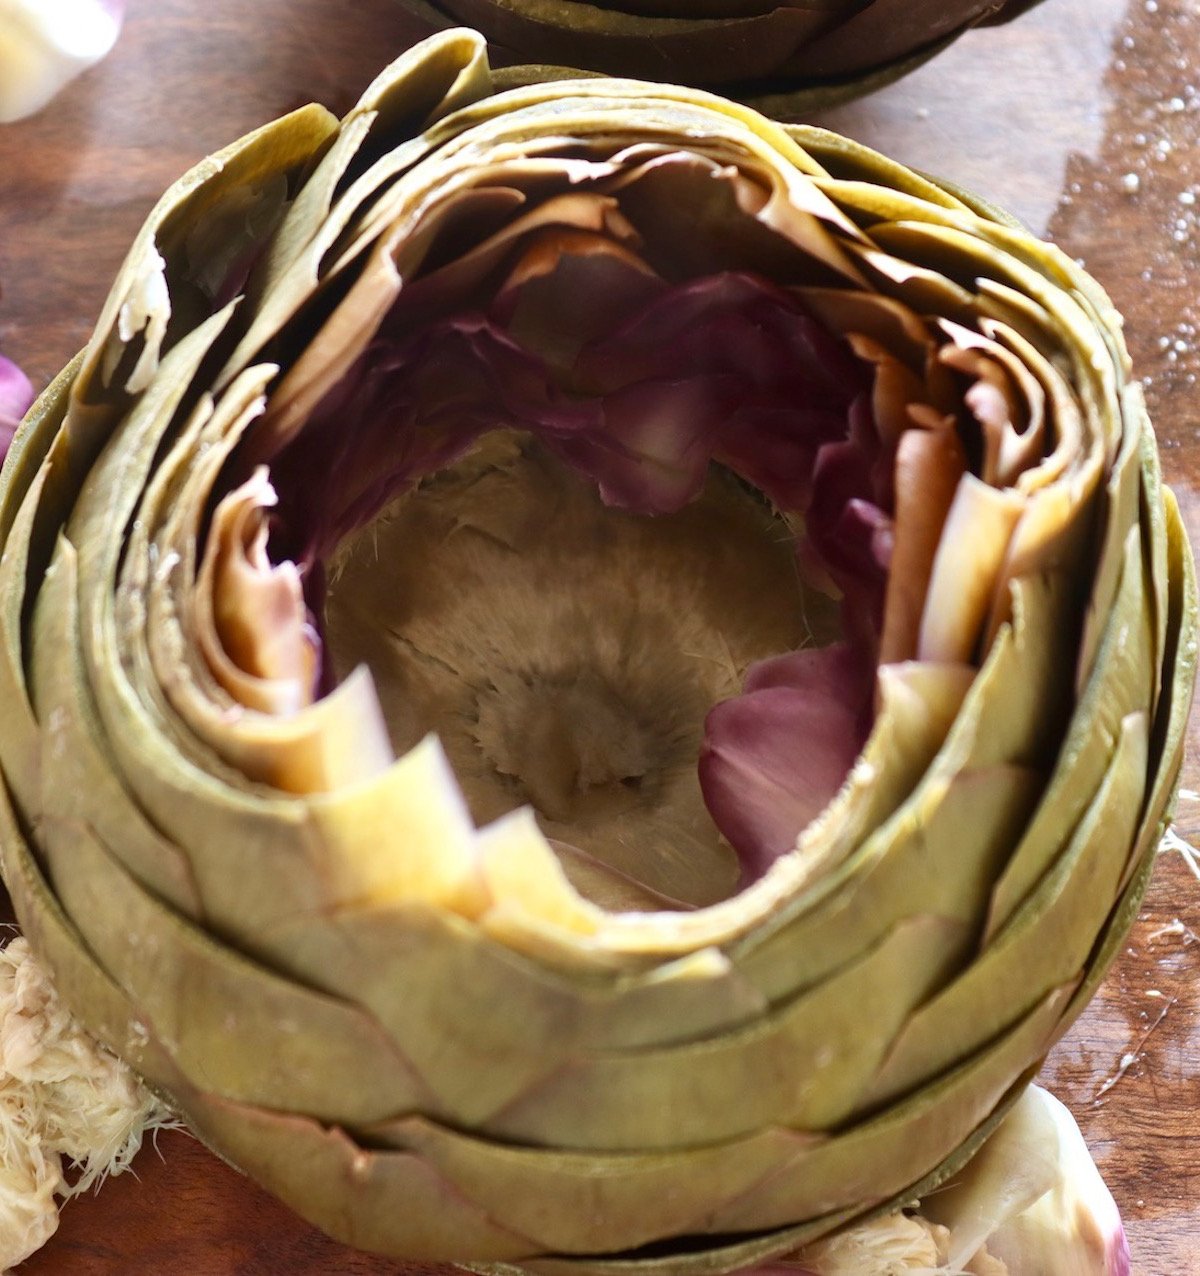 Top view of a steamed artichoke with the choke remove, revealing the heart.